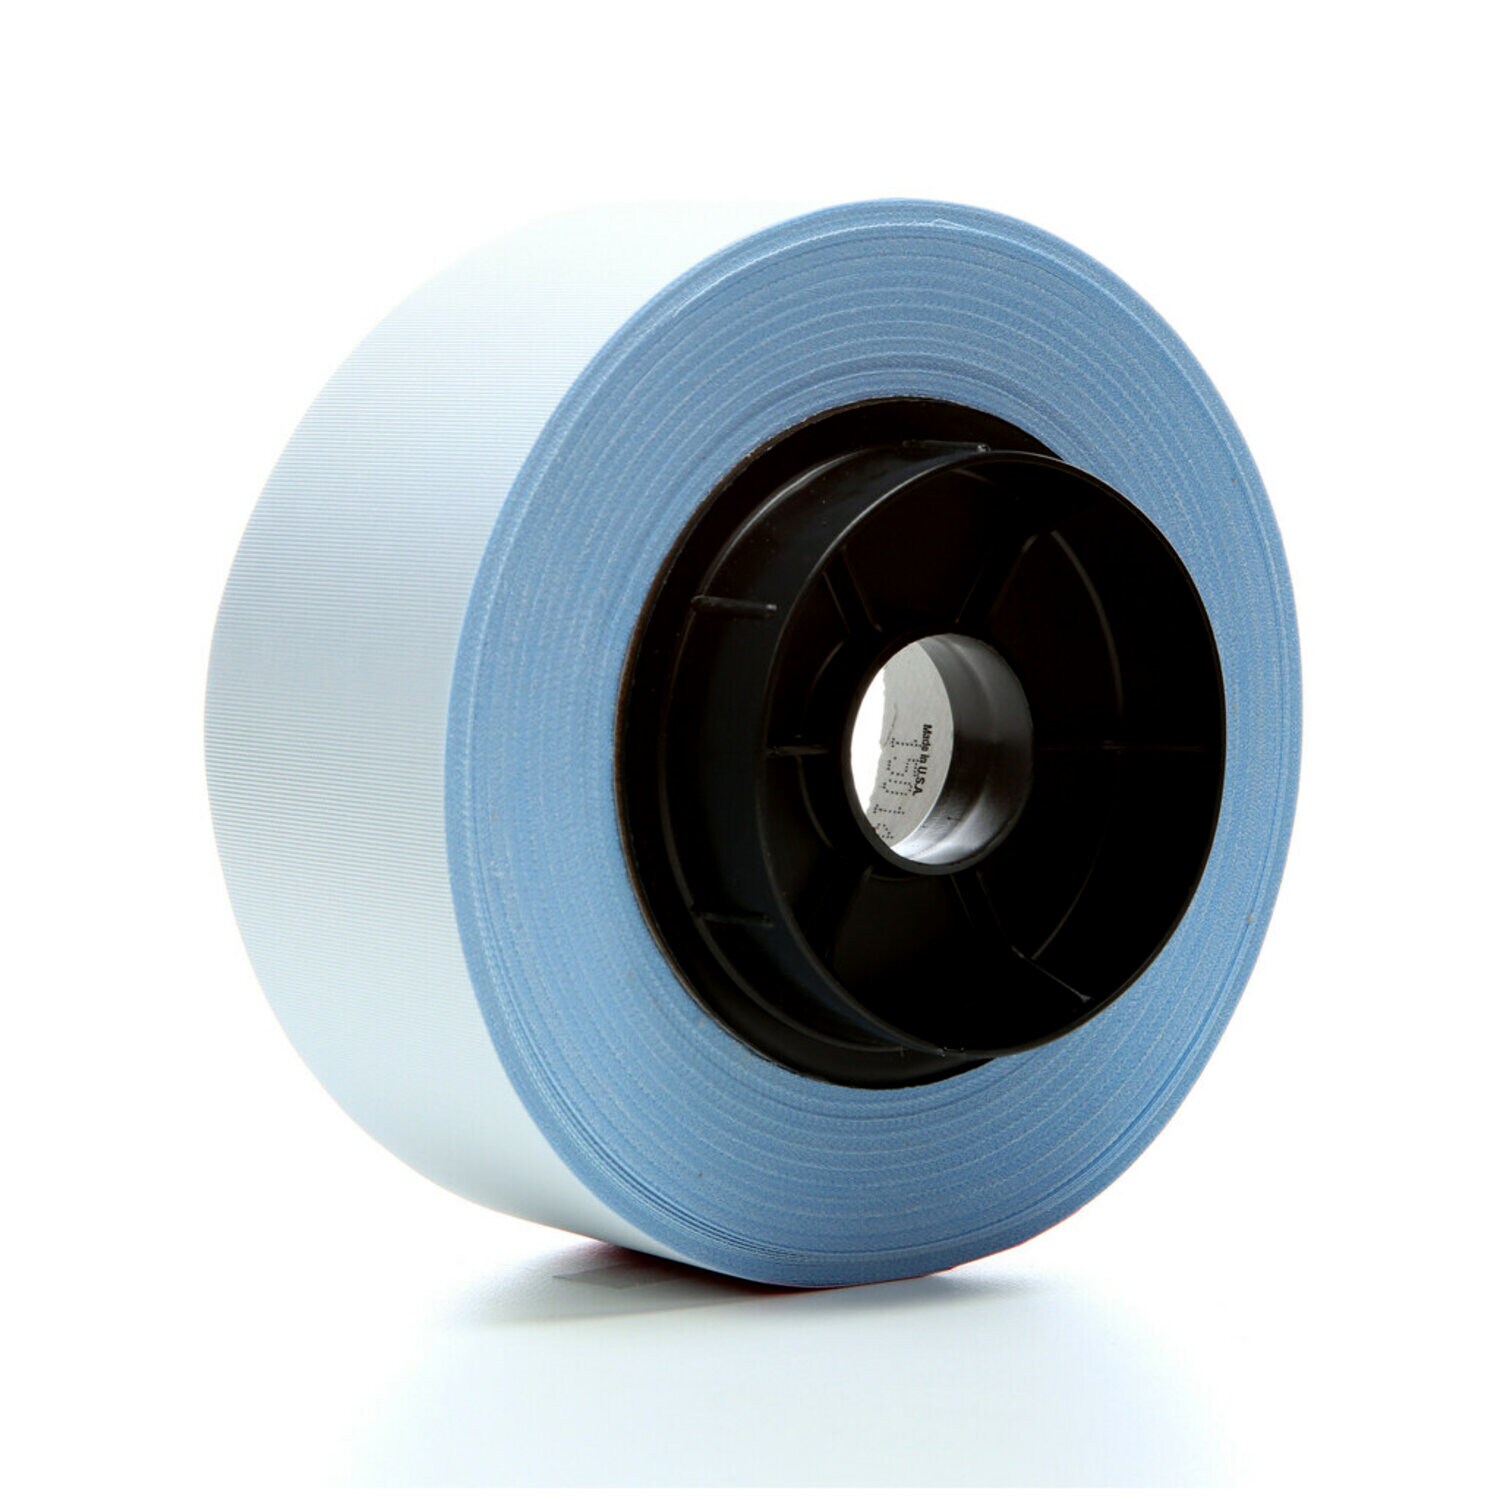 https://www.e-aircraftsupply.com/ItemImages/04/1046783E_3mtm-glass-cloth-tape-398fr-white-2-in-x-36-yd.jpg